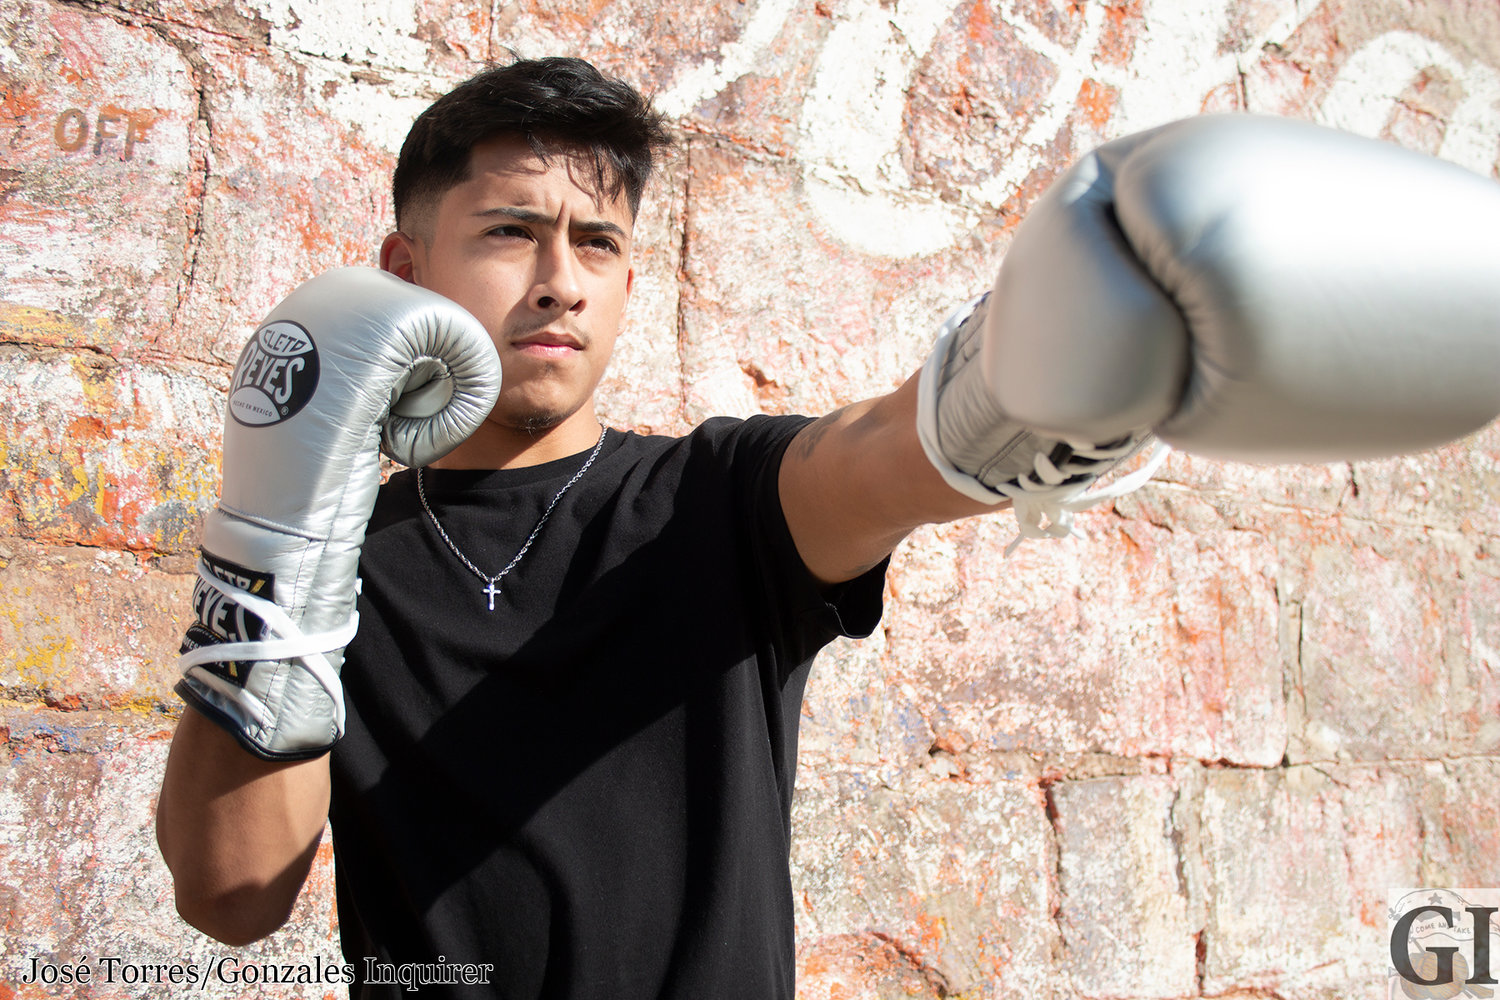 Former Gonzales Apache Ruben Ortiz is all in on becoming a boxer. Ortiz was a cross-country runner as well as a soccer and track and field athlete. He quit his job recently to pursue a career in boxing.